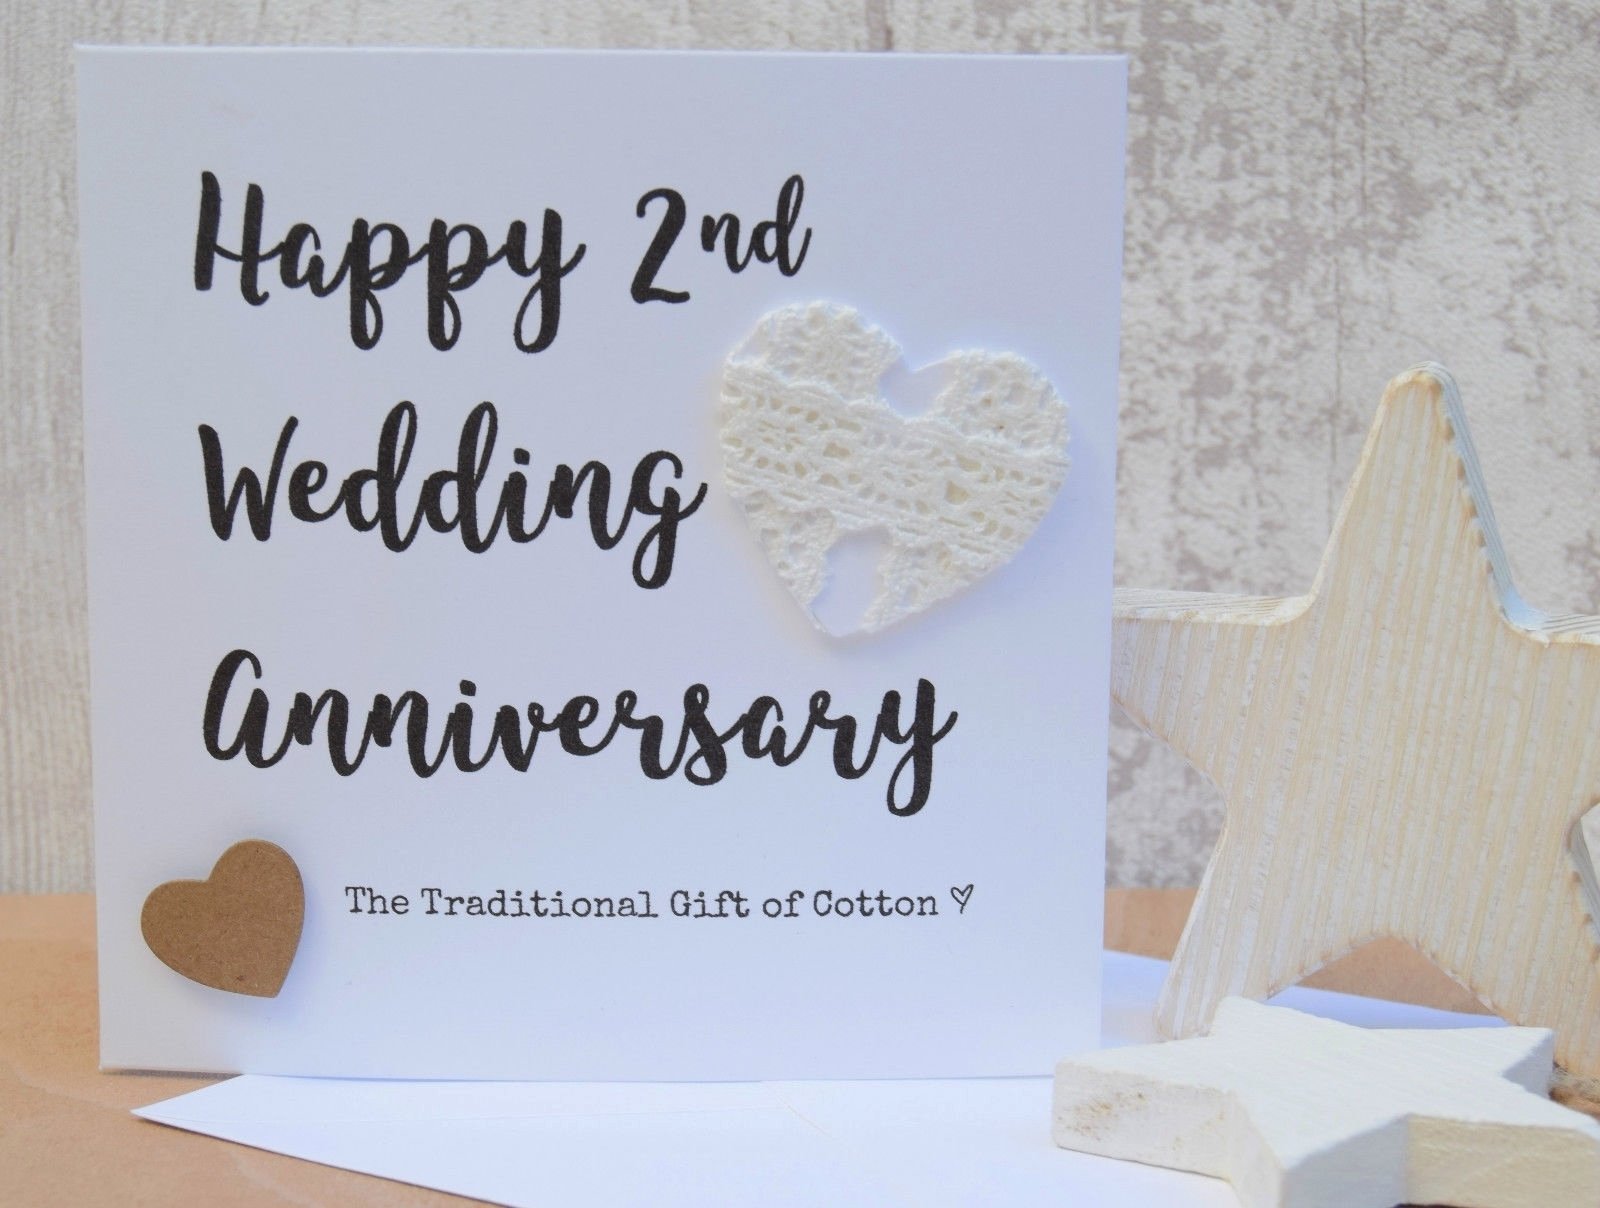 10 Lovely Wedding Anniversary Ideas For Her 15th wedding anniversary gift ideas for her new 2nd wedding 1 2022